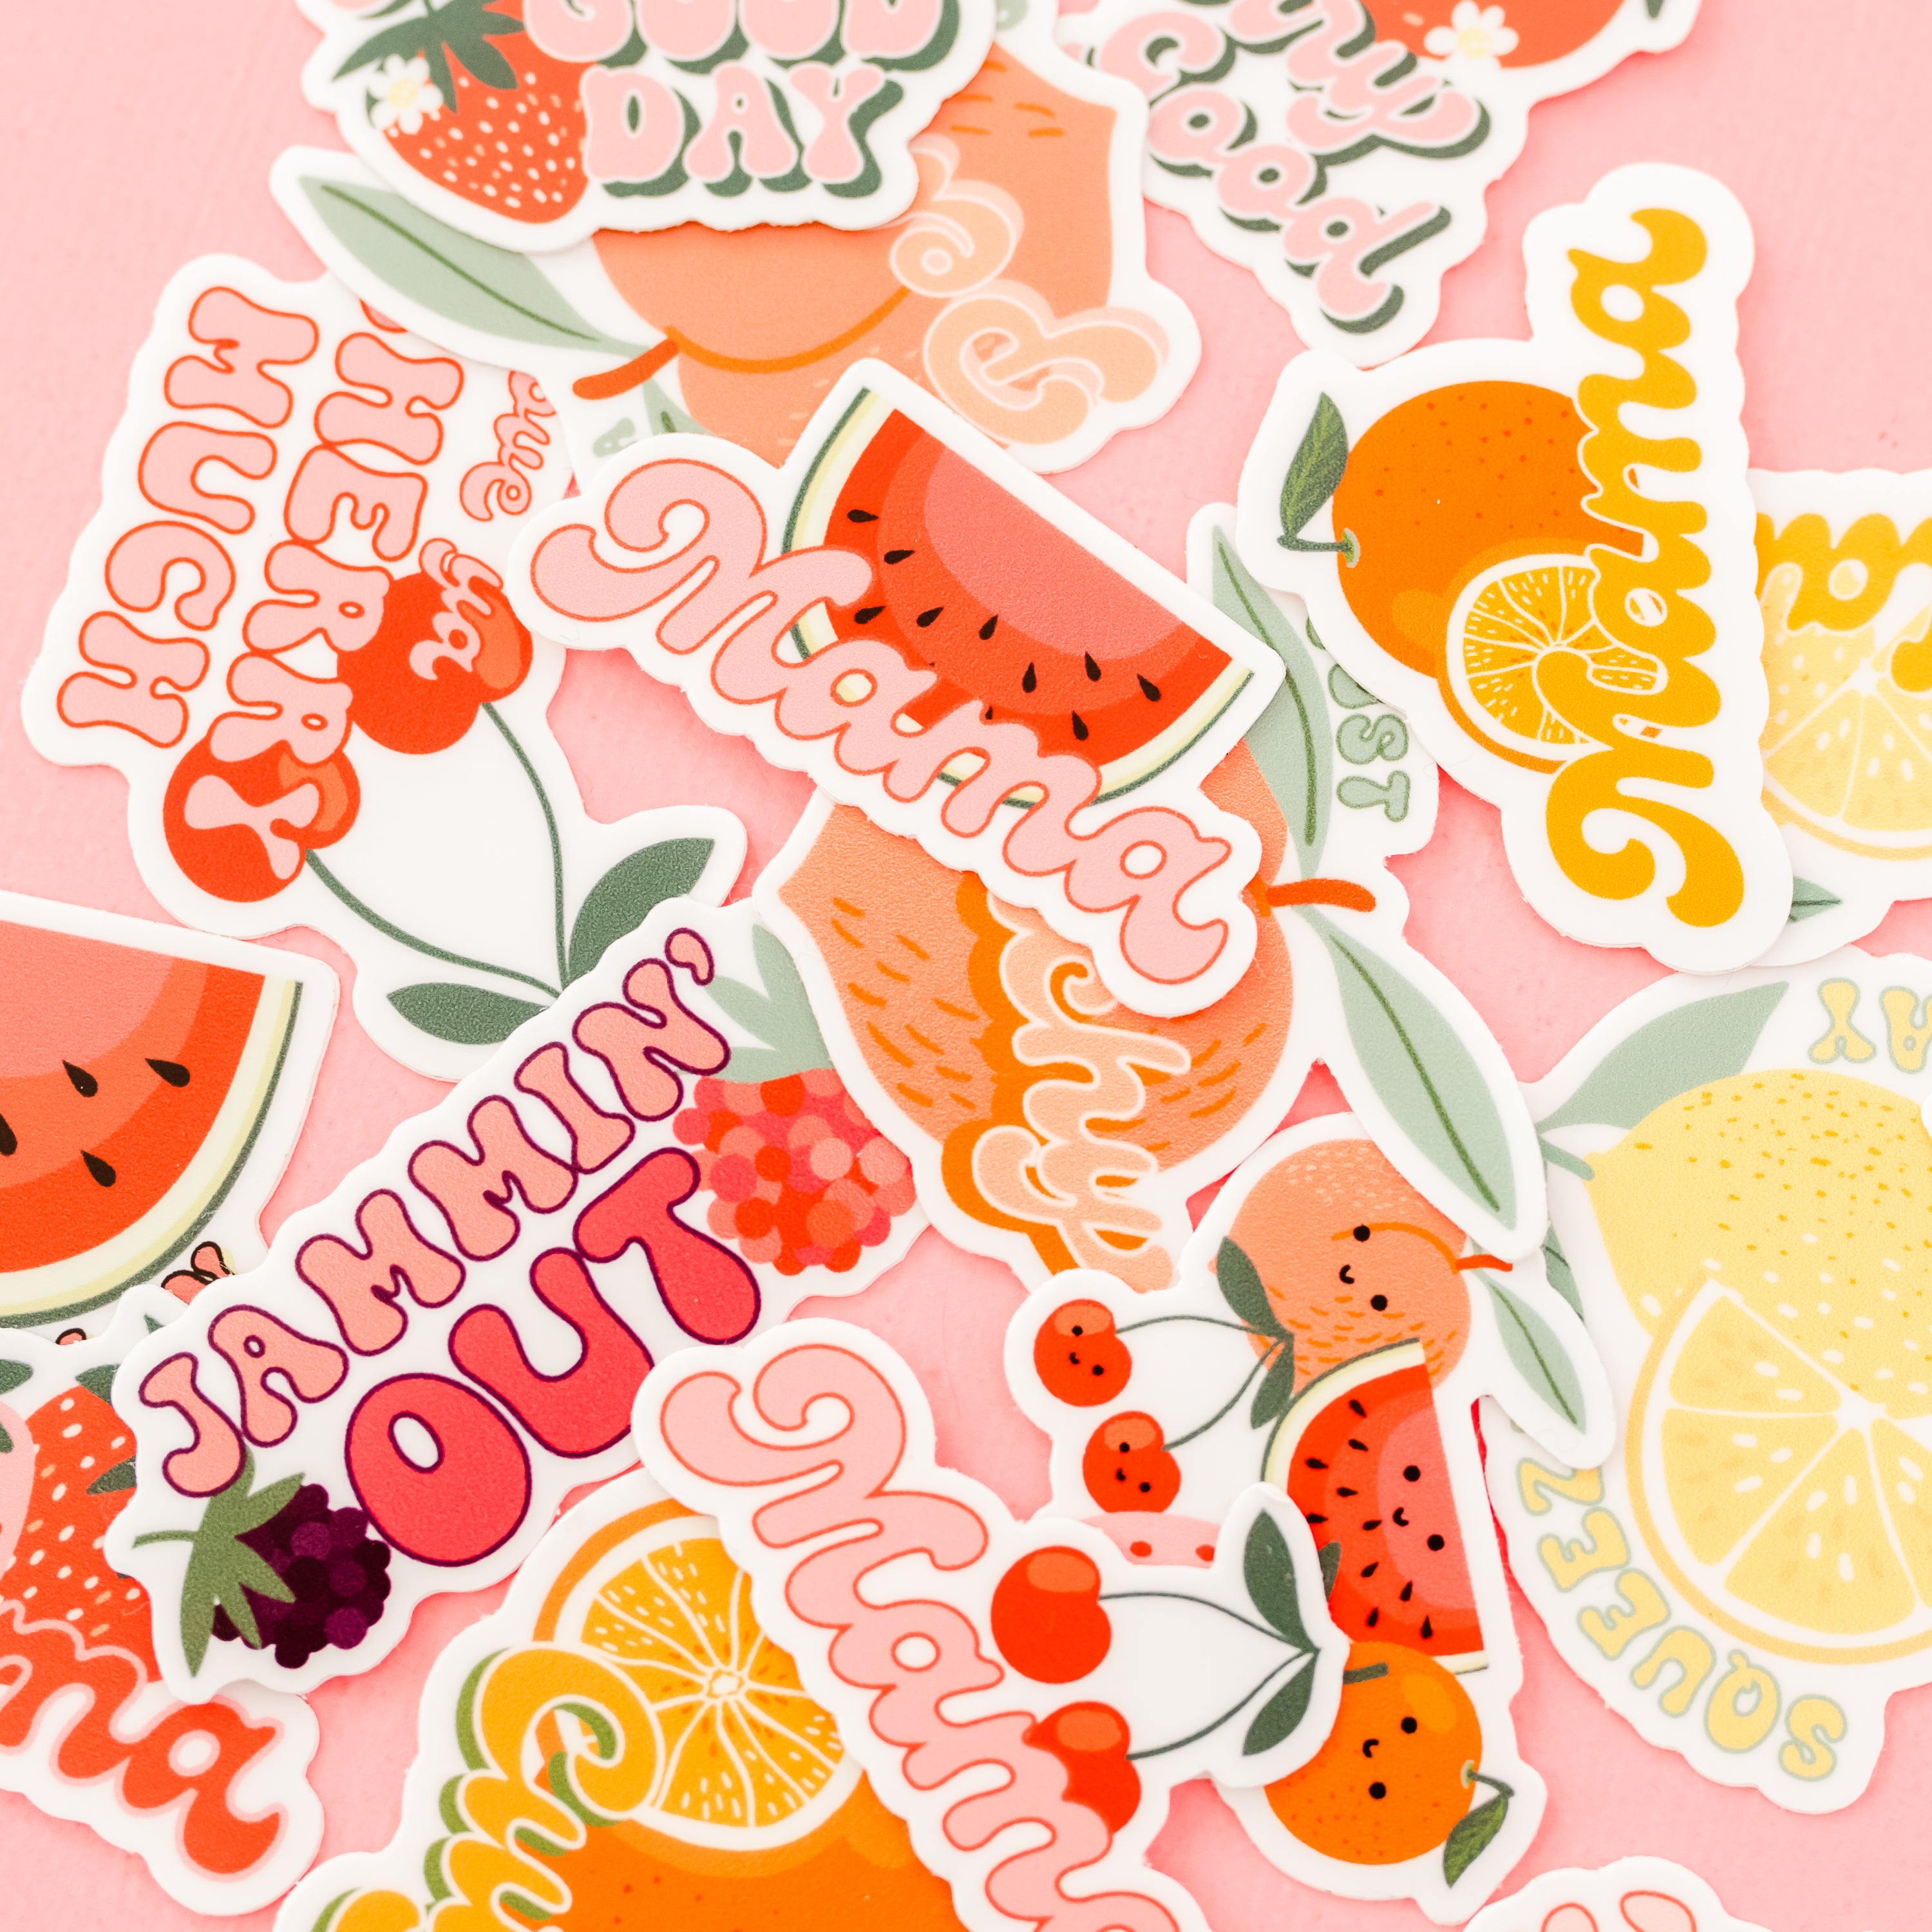 PICK YOUR OWN Stickers Sticker Pack Aesthetic Custom Sticker Pack